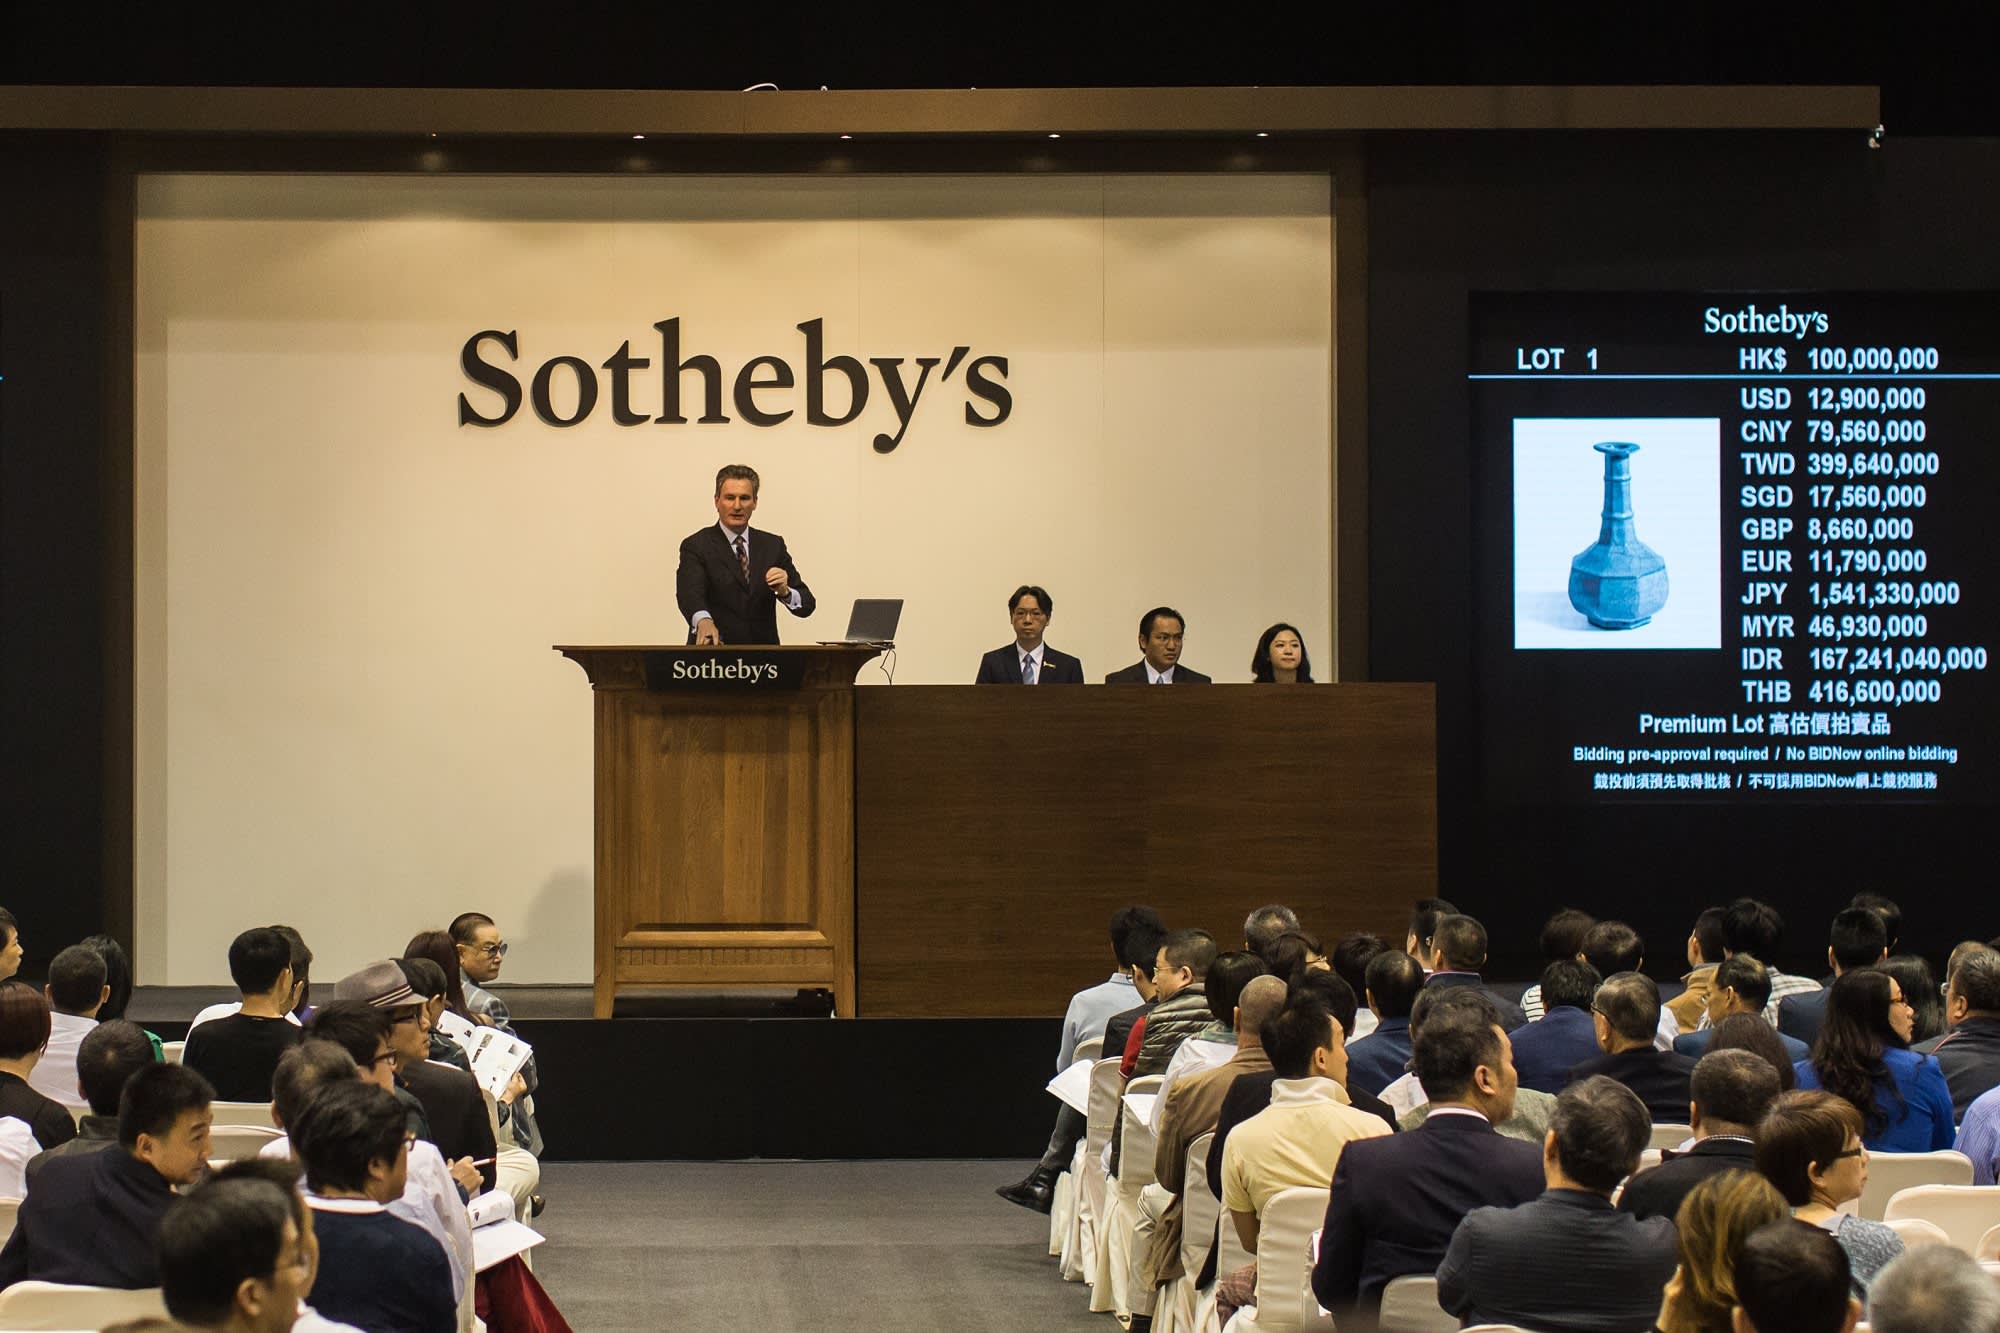 Sotheby's auction house is being taken private by group controlled by art collector Patrick Drahi - CNBC